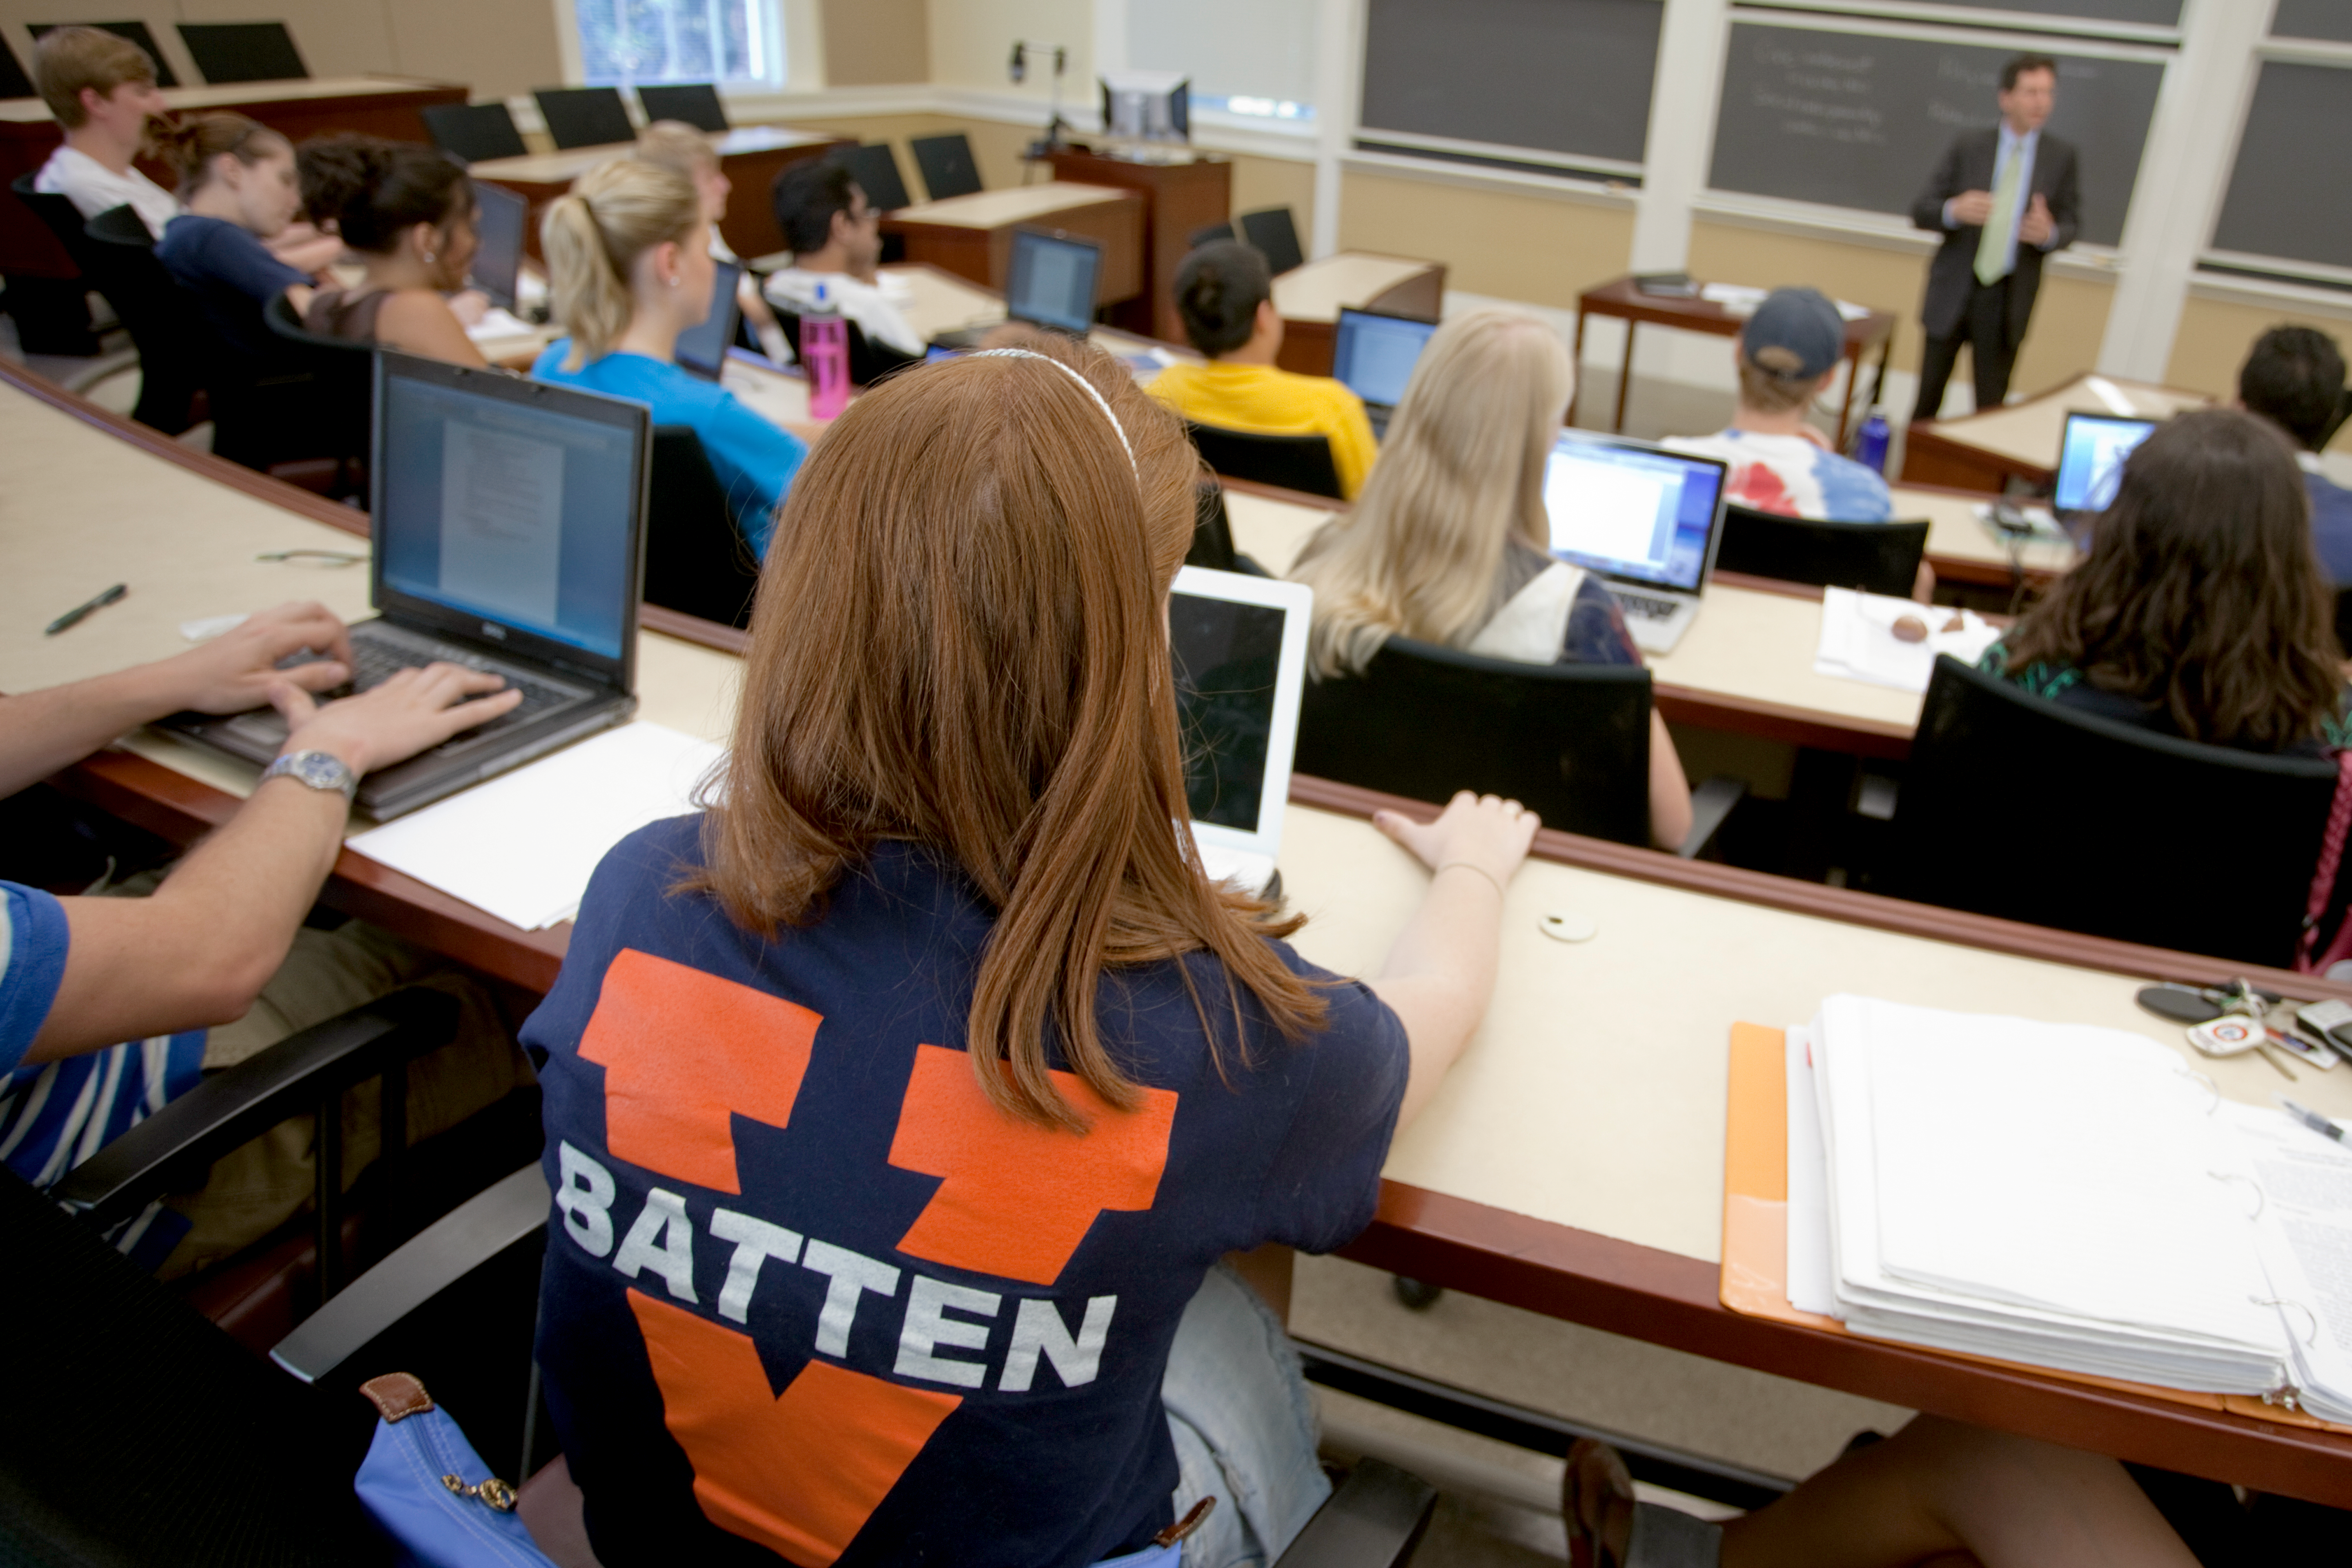 Student with Batten t-shirt looking at a professor speaking in front of class